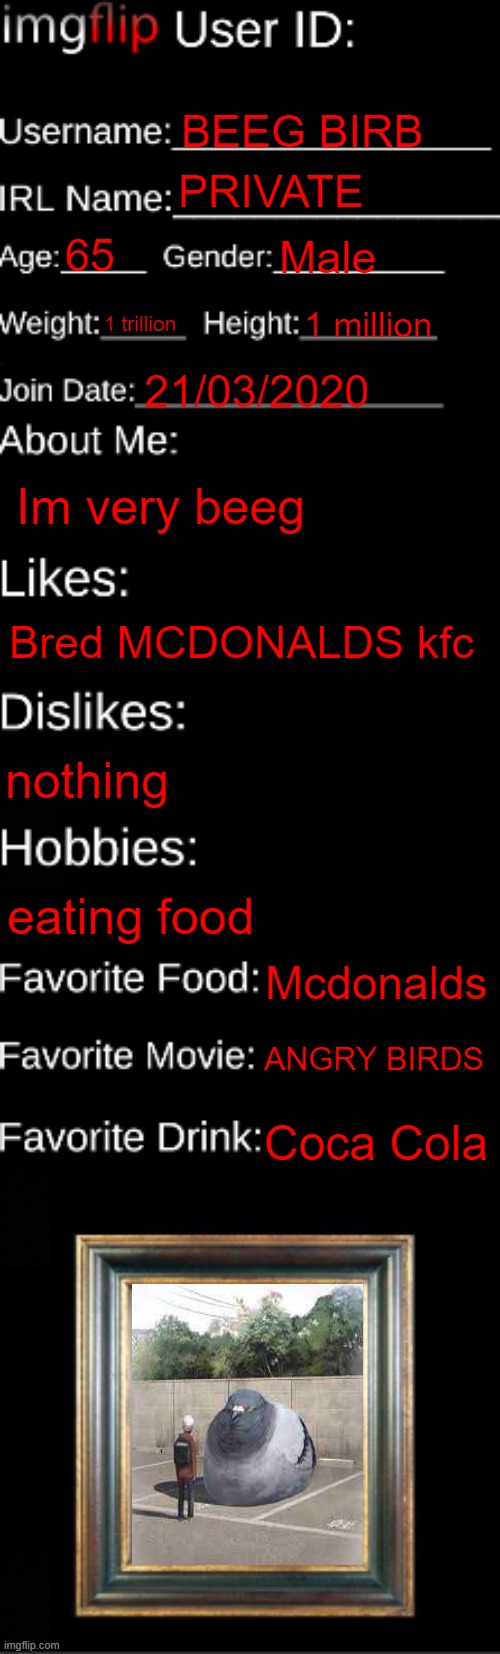 imgflip ID Card | BEEG BIRB; PRIVATE; 65; Male; 1 trillion; 1 million; 21/03/2020; Im very beeg; Bred MCDONALDS kfc; nothing; eating food; Mcdonalds; ANGRY BIRDS; Coca Cola | image tagged in imgflip id card | made w/ Imgflip meme maker